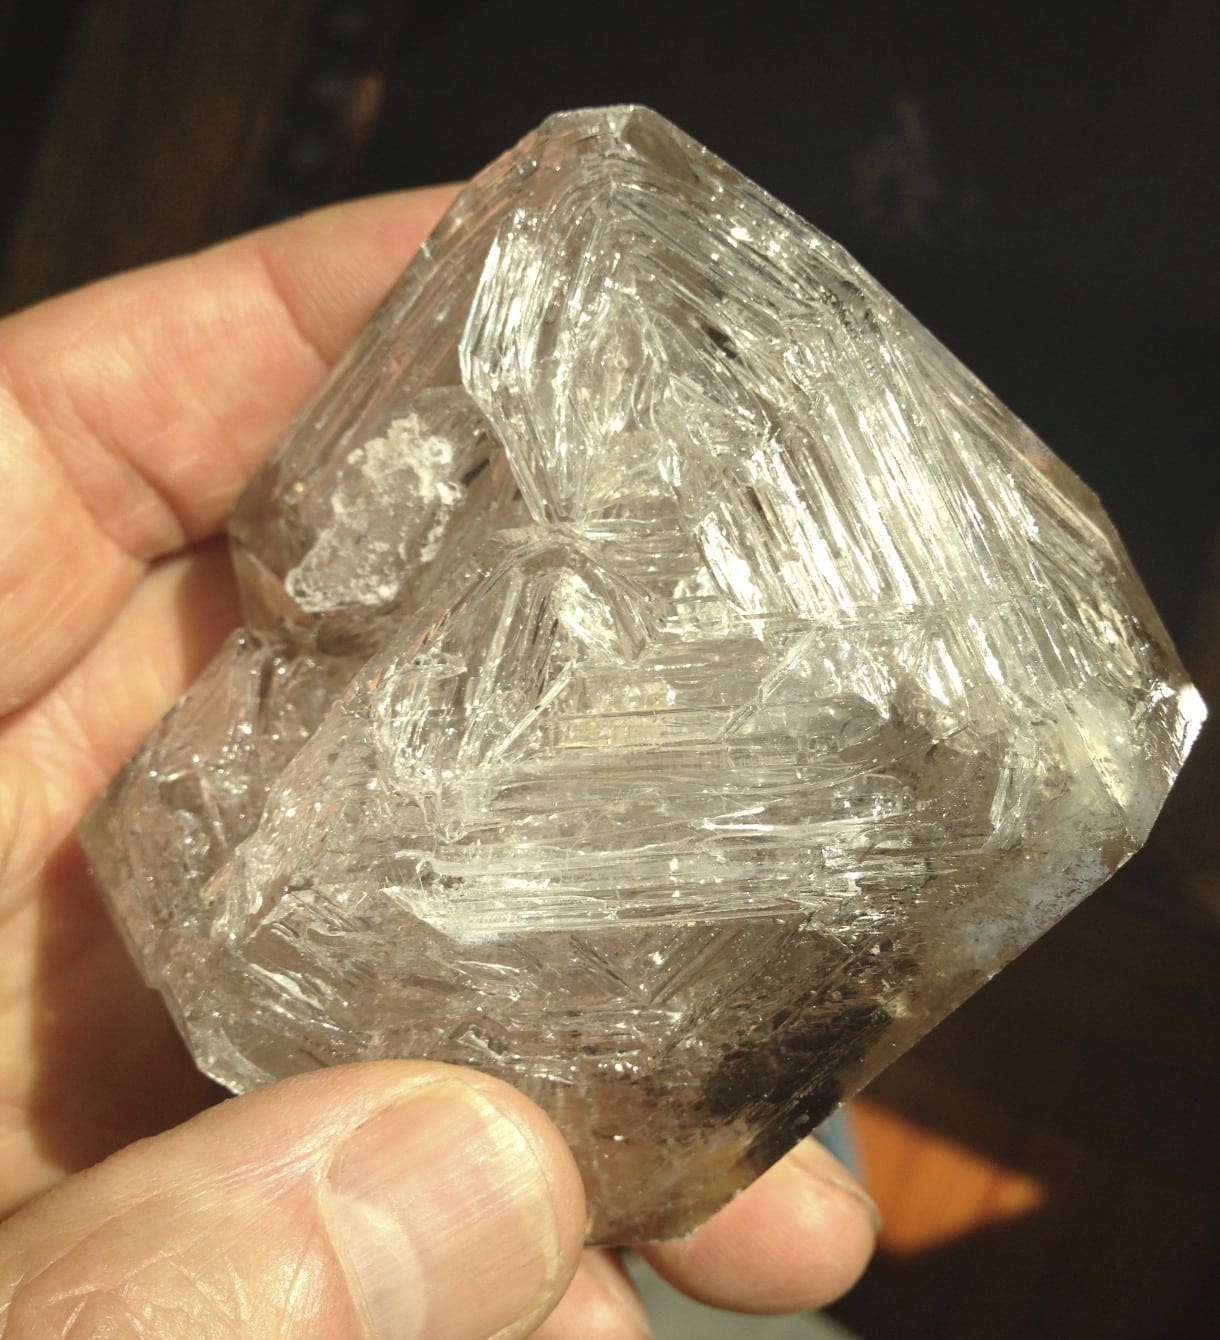 Fenster, or Skeletal Quartz, is emblematic of "sickness in health" - where the interior has been compromised - but the shell and structure remain quite solid.